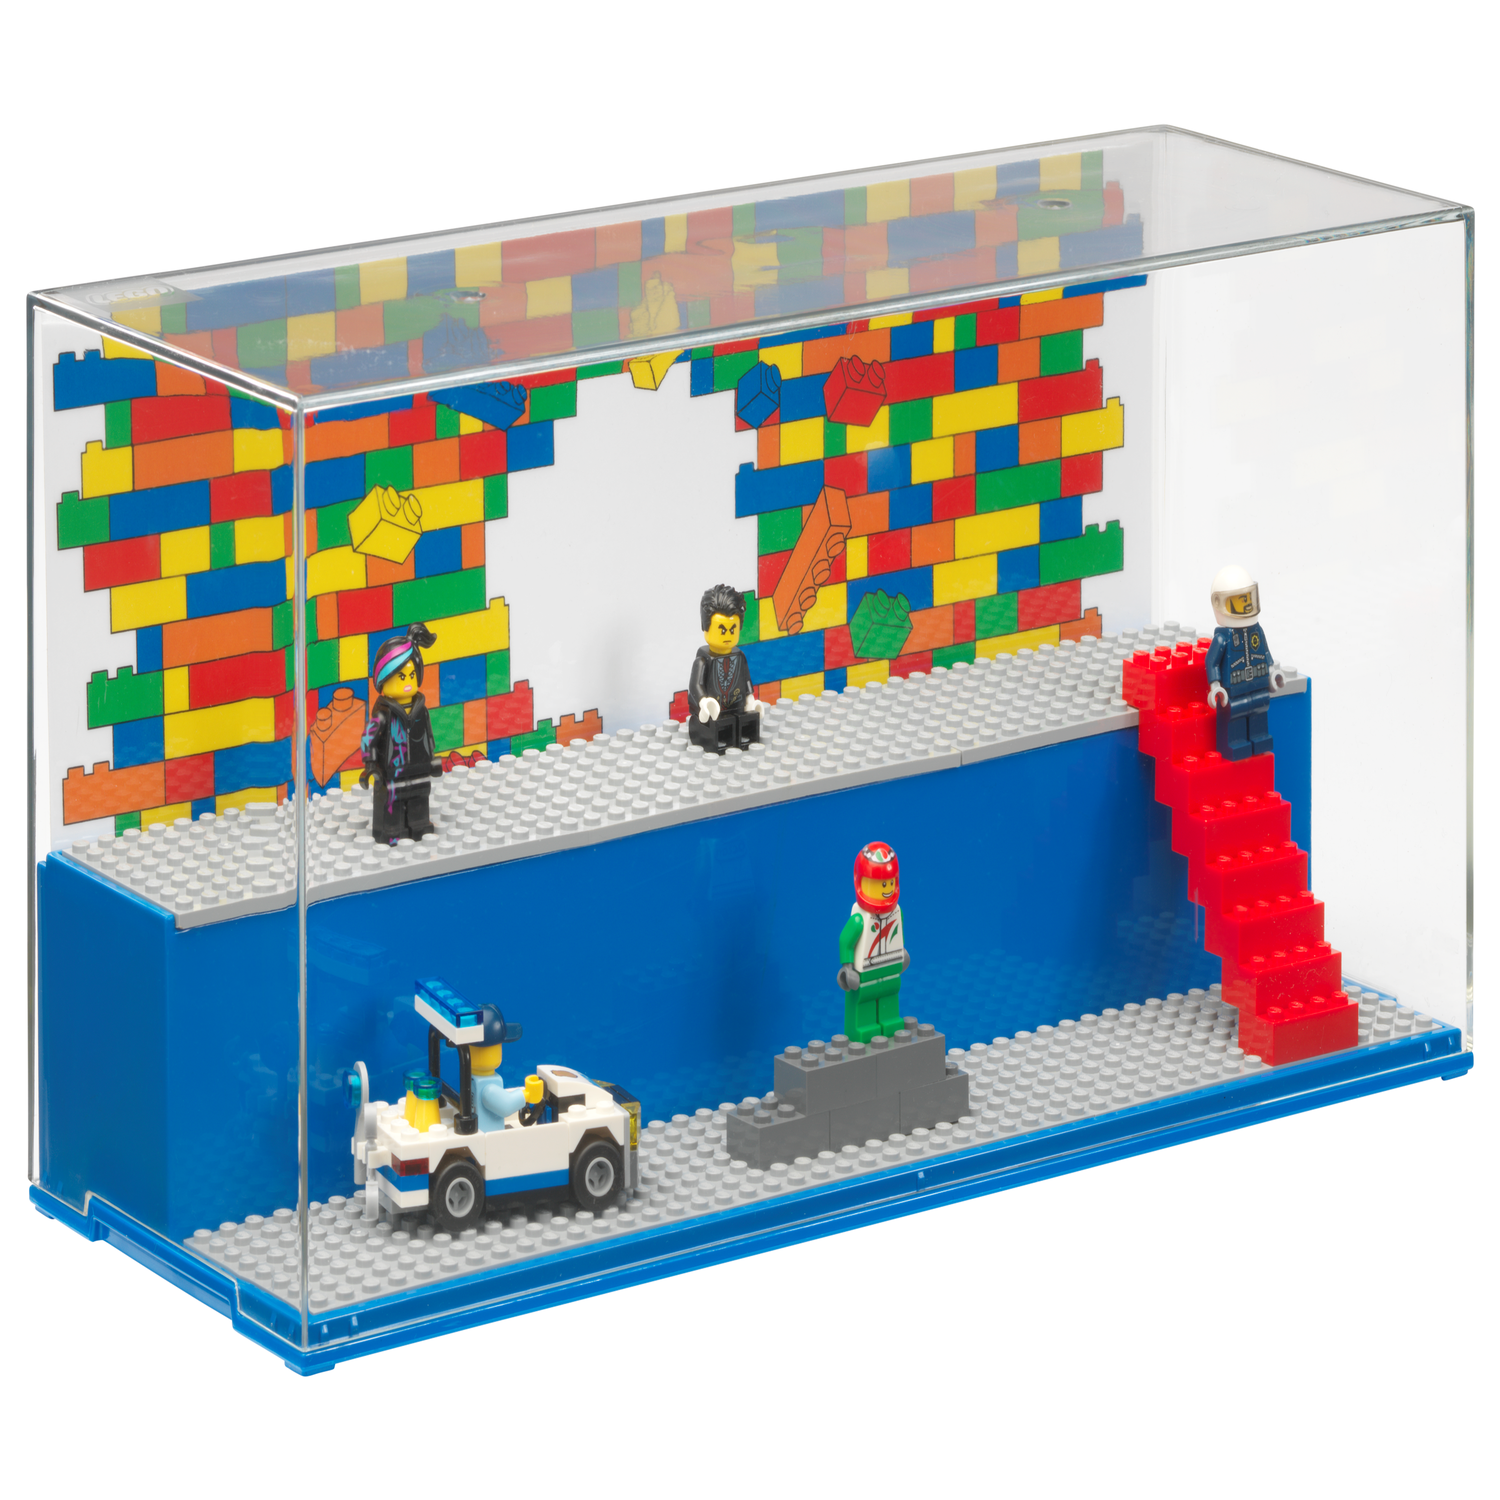 Play and Display Case – Blue 5006157, Other